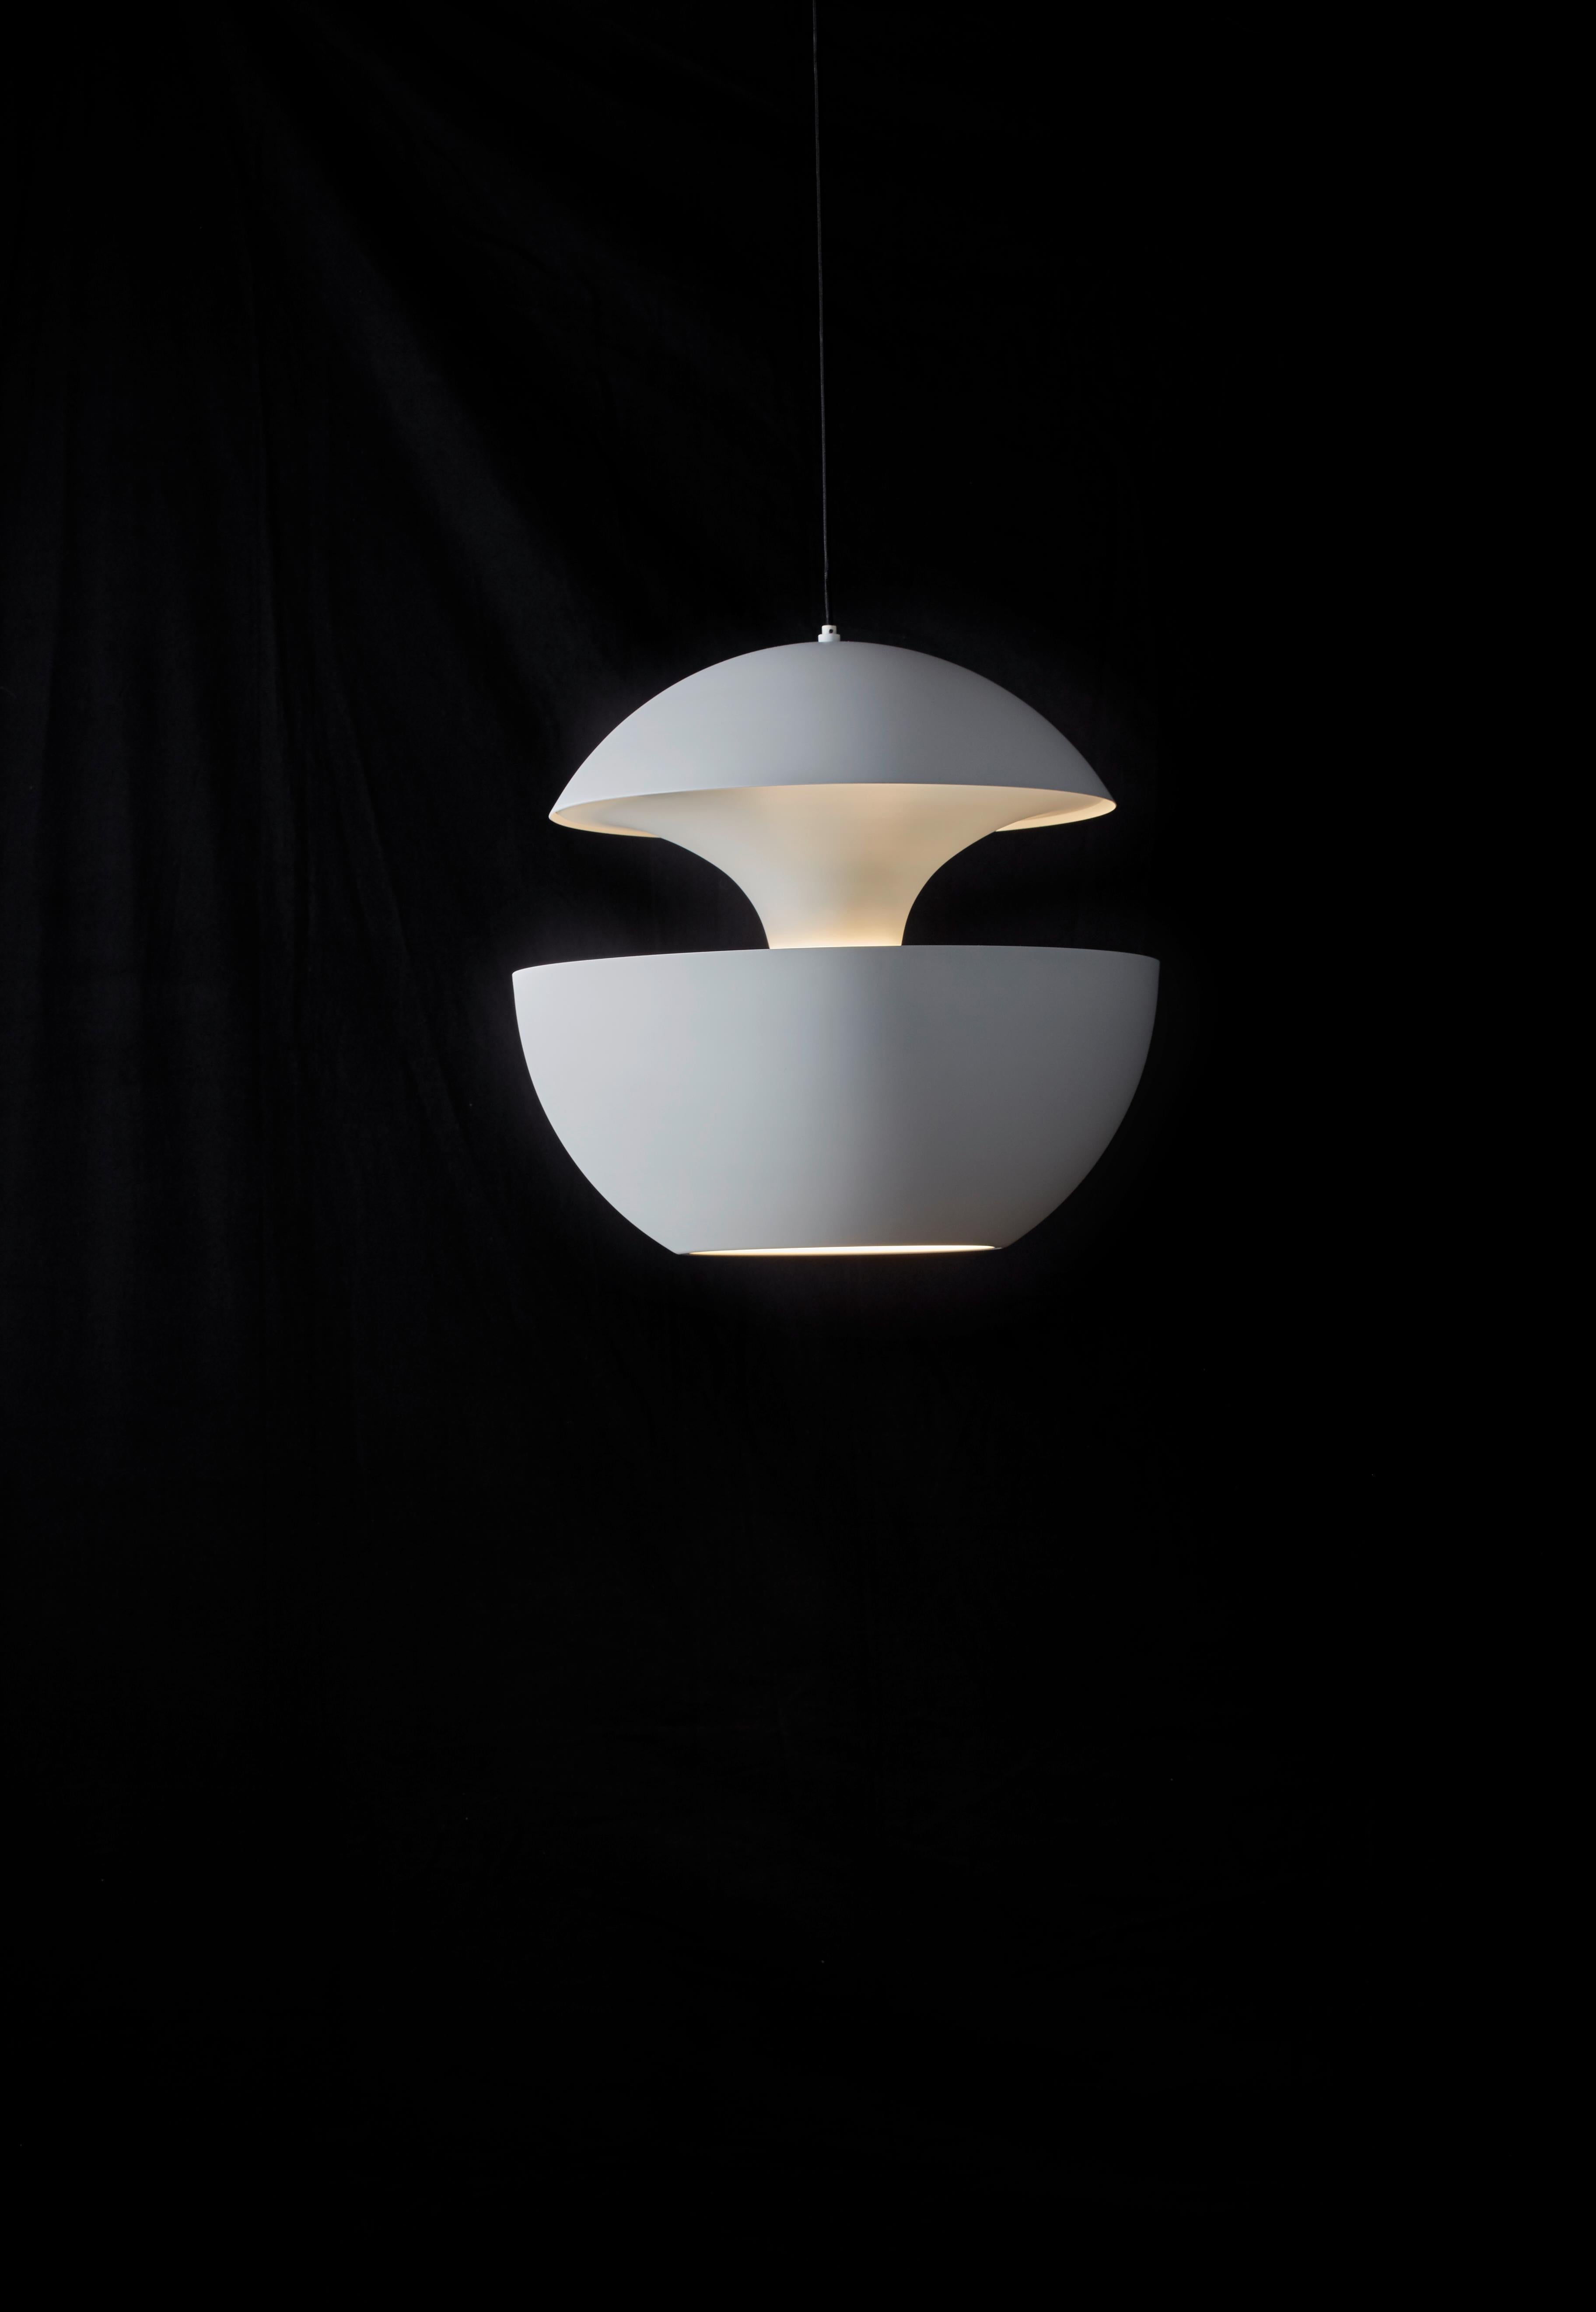 Here comes the sun large white pendant lamp by Bertrand Balas
Dimensions: D 35 x H 35 cm
Materials: Aluminum
Available in different sizes and colors,

All our lamps can be wired according to each country. If sold to the USA it will be wired for